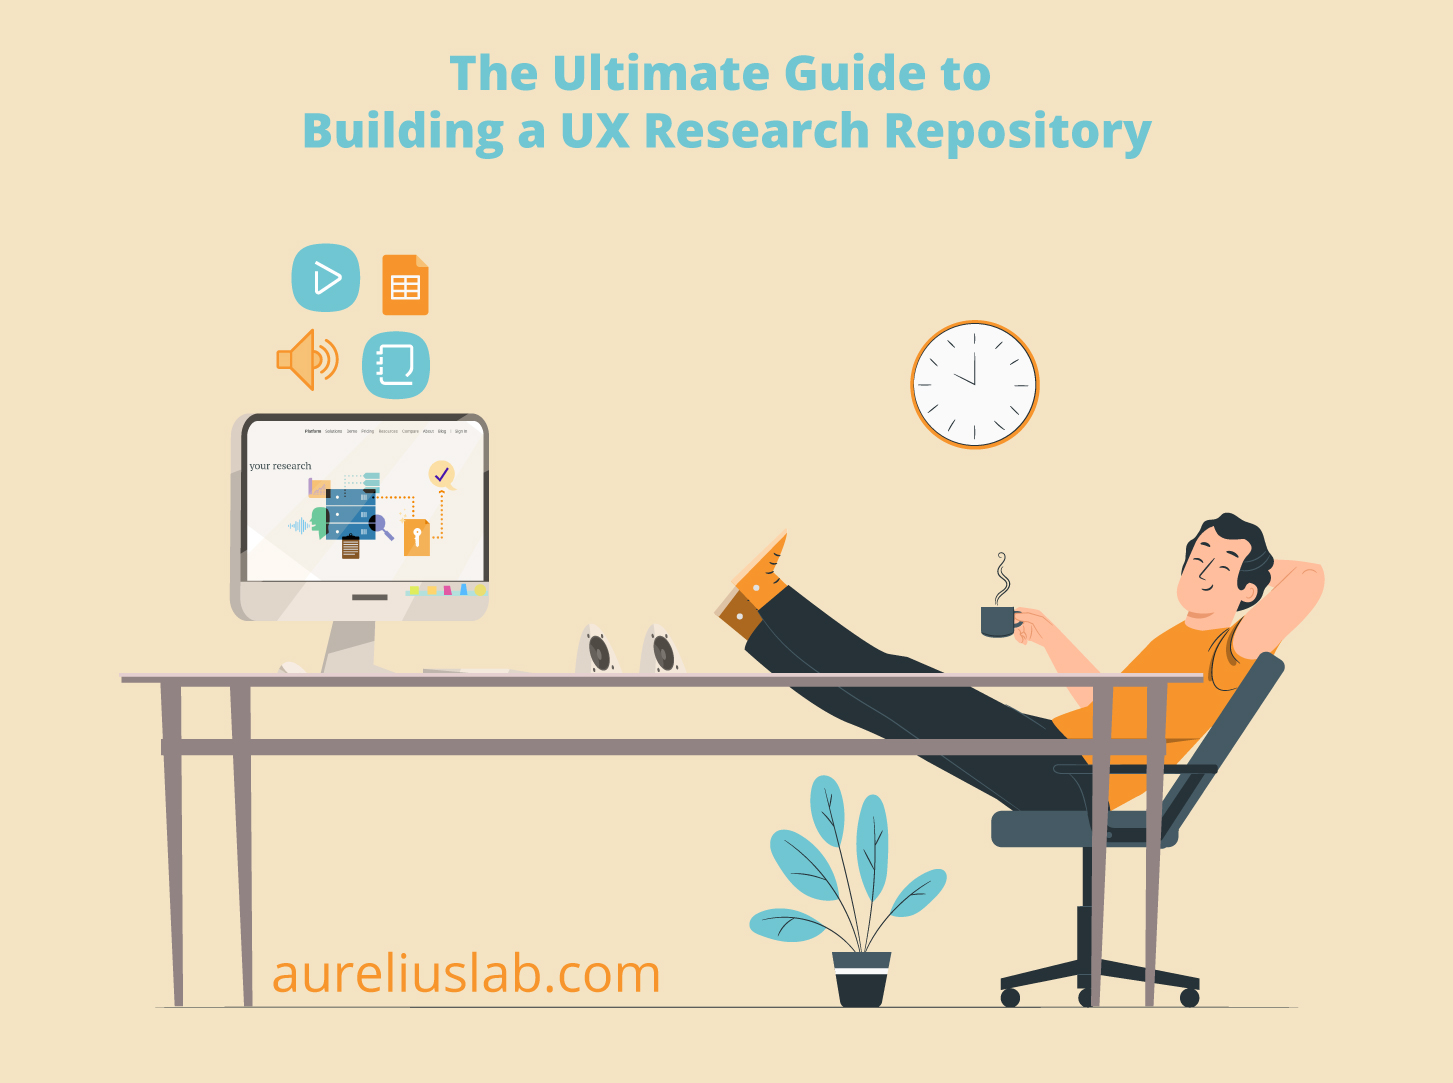 The Ultimate Guide to Building a UX Research Repository